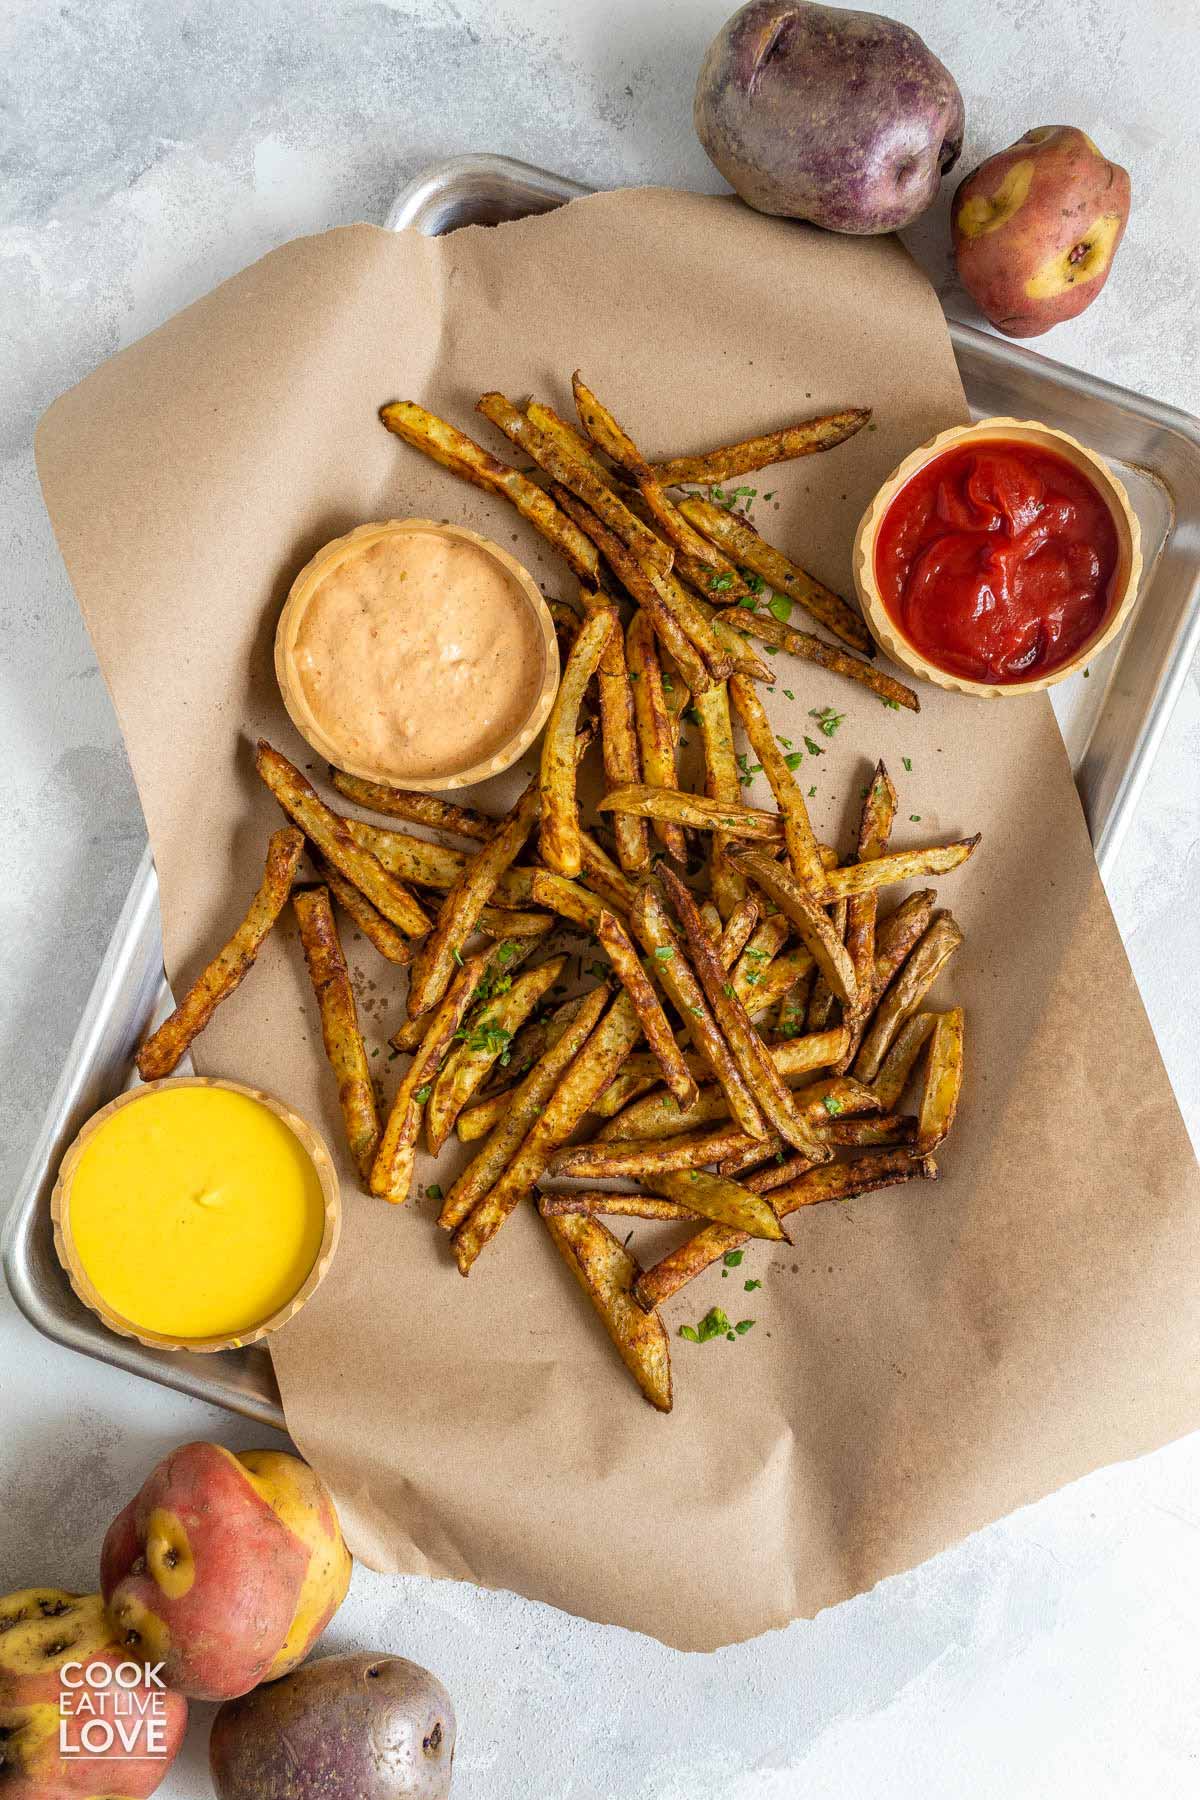 Oven baked fries with sauces.